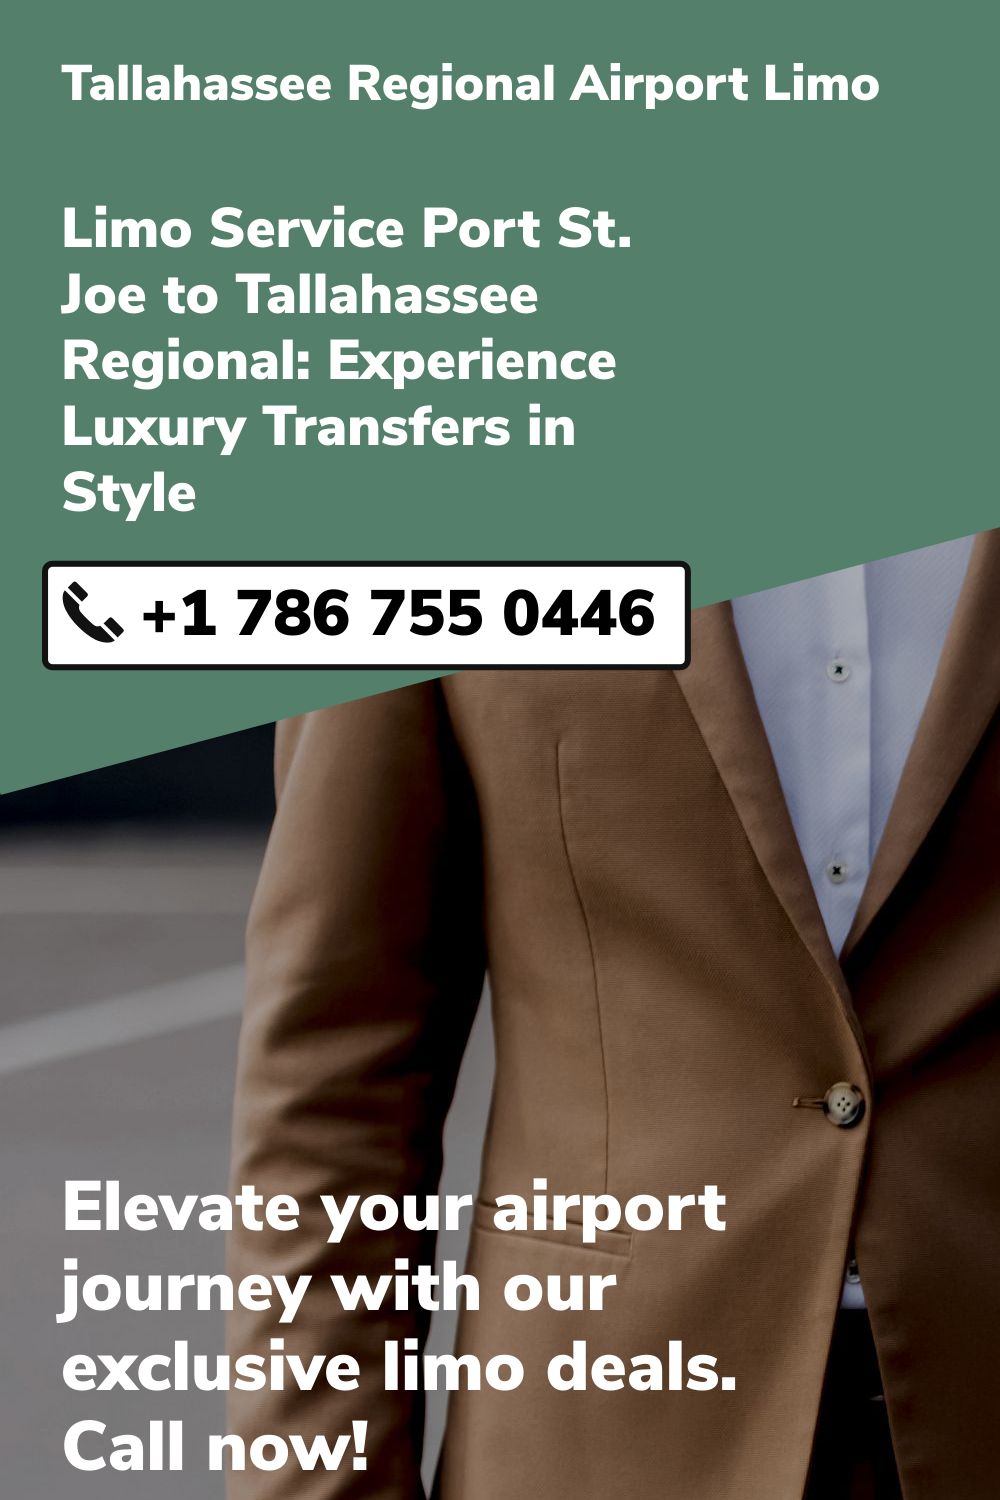 Tallahassee Regional Airport Limo